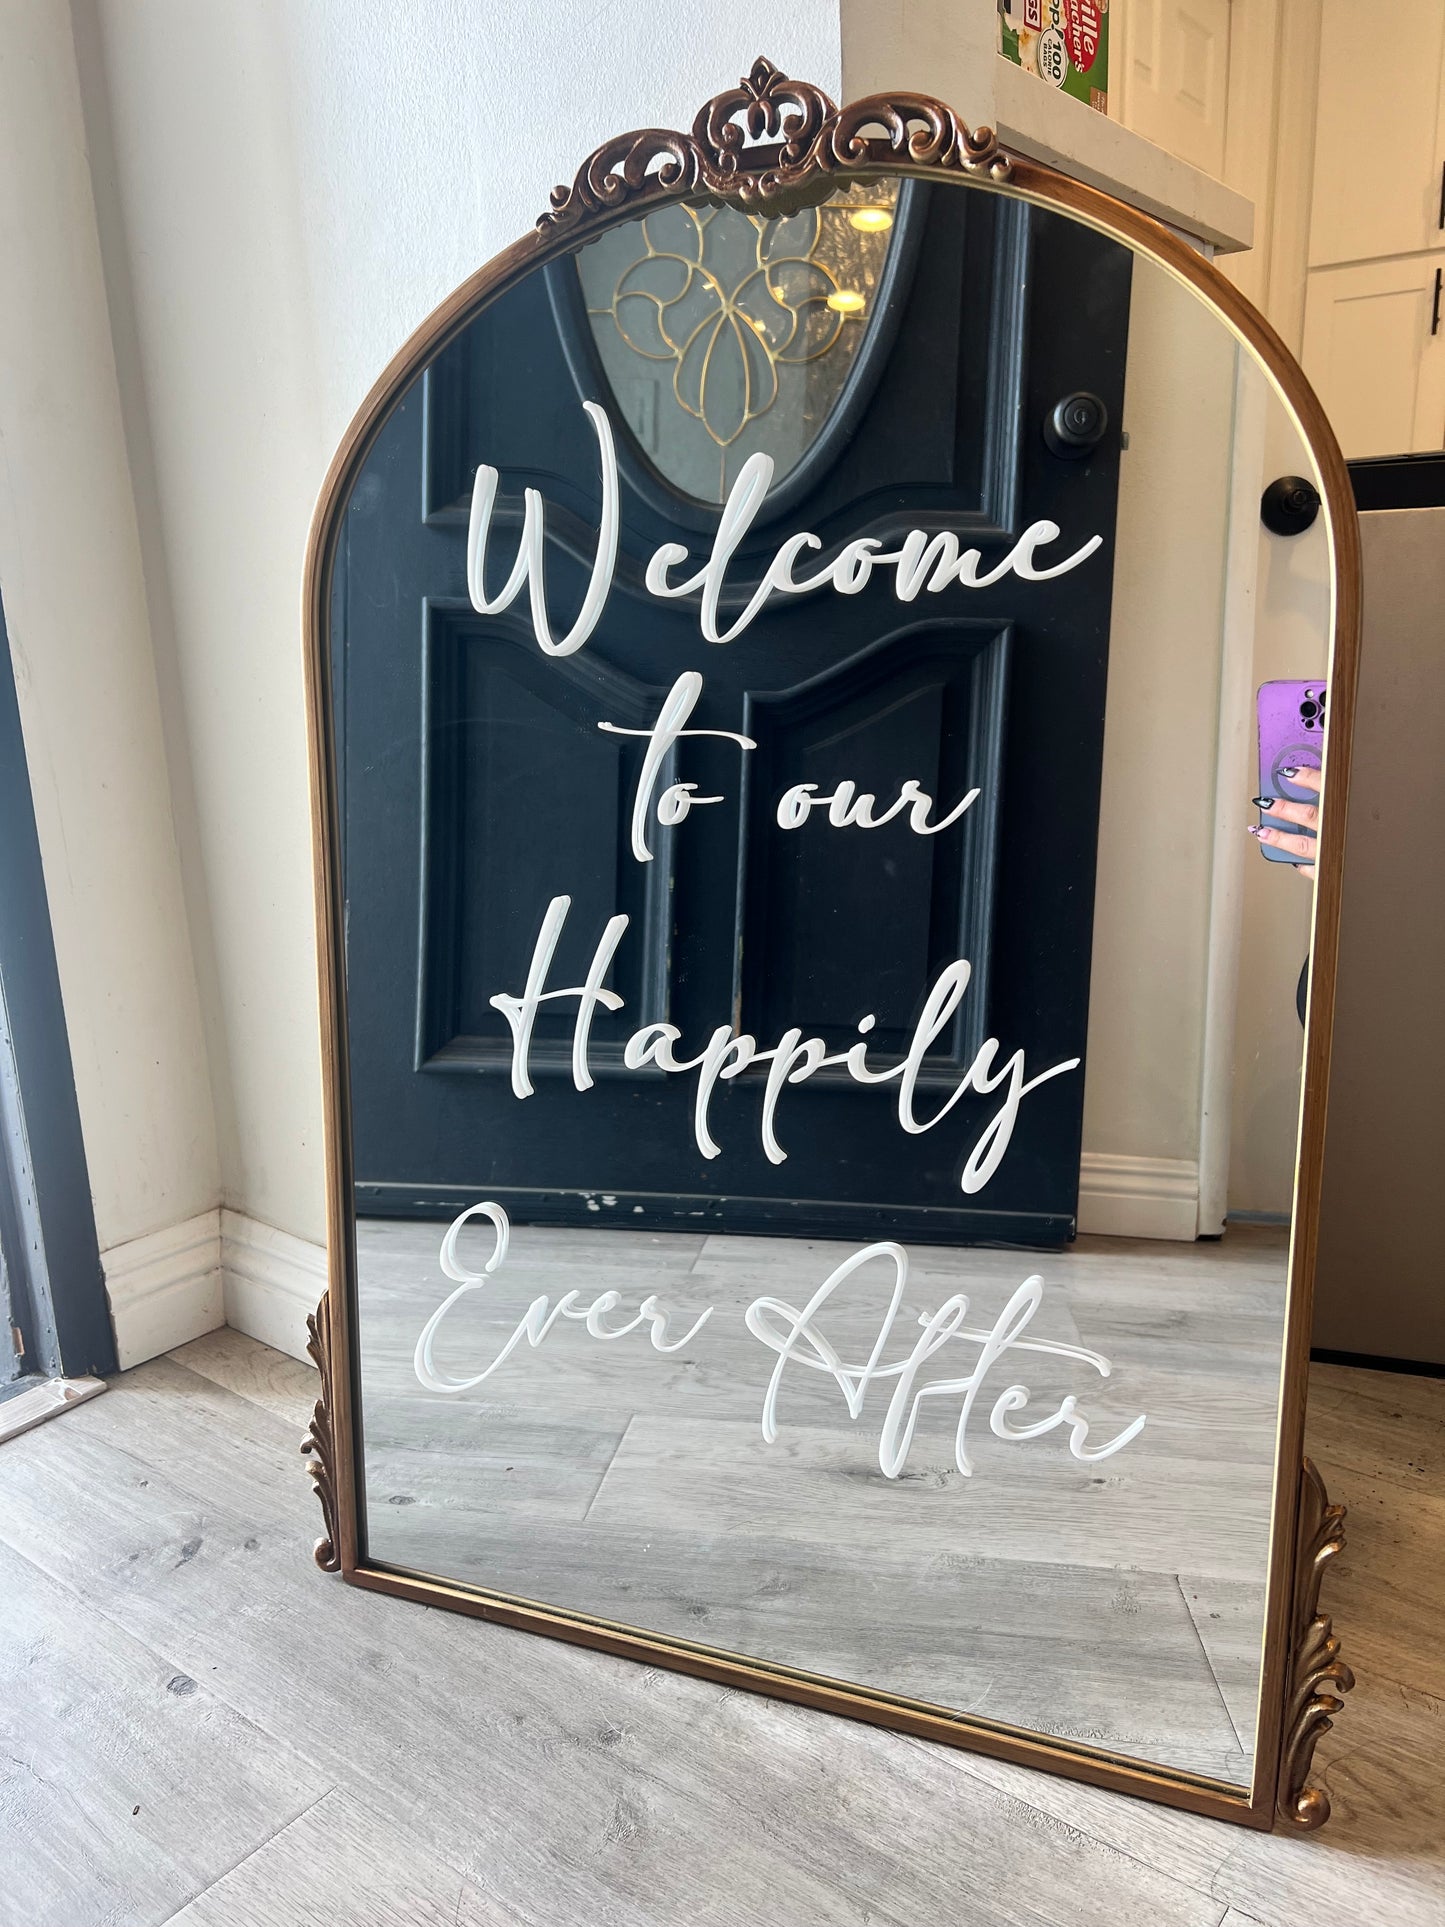 Welcome Mirror